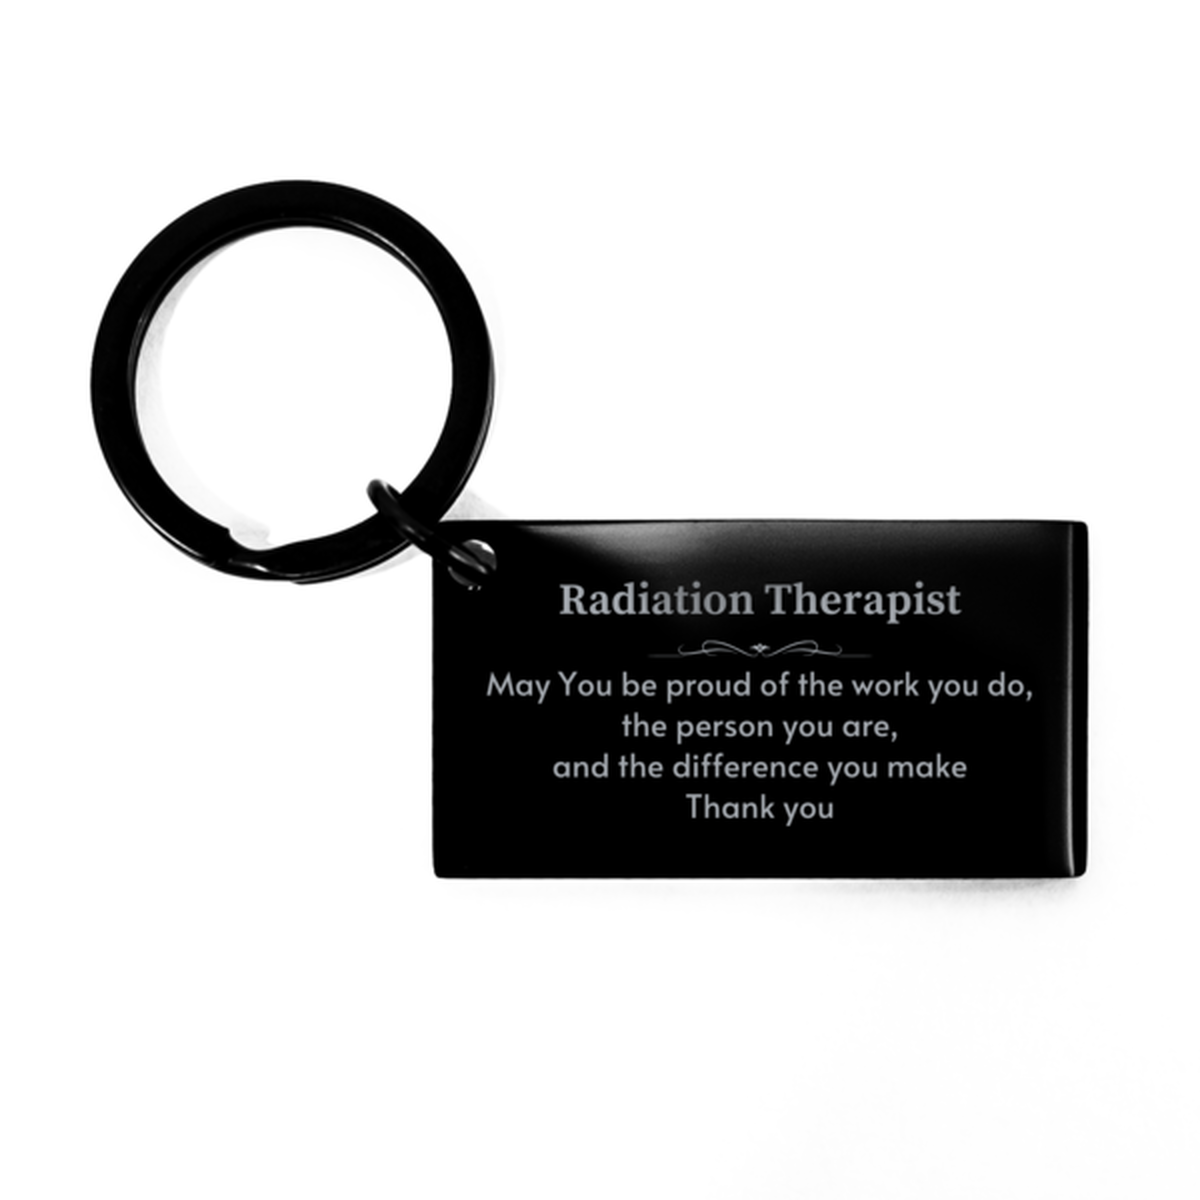 Heartwarming Keychain Retirement Coworkers Gifts for Radiation Therapist, Supervisor May You be proud of the work you do, the person you are Gifts for Boss Men Women Friends